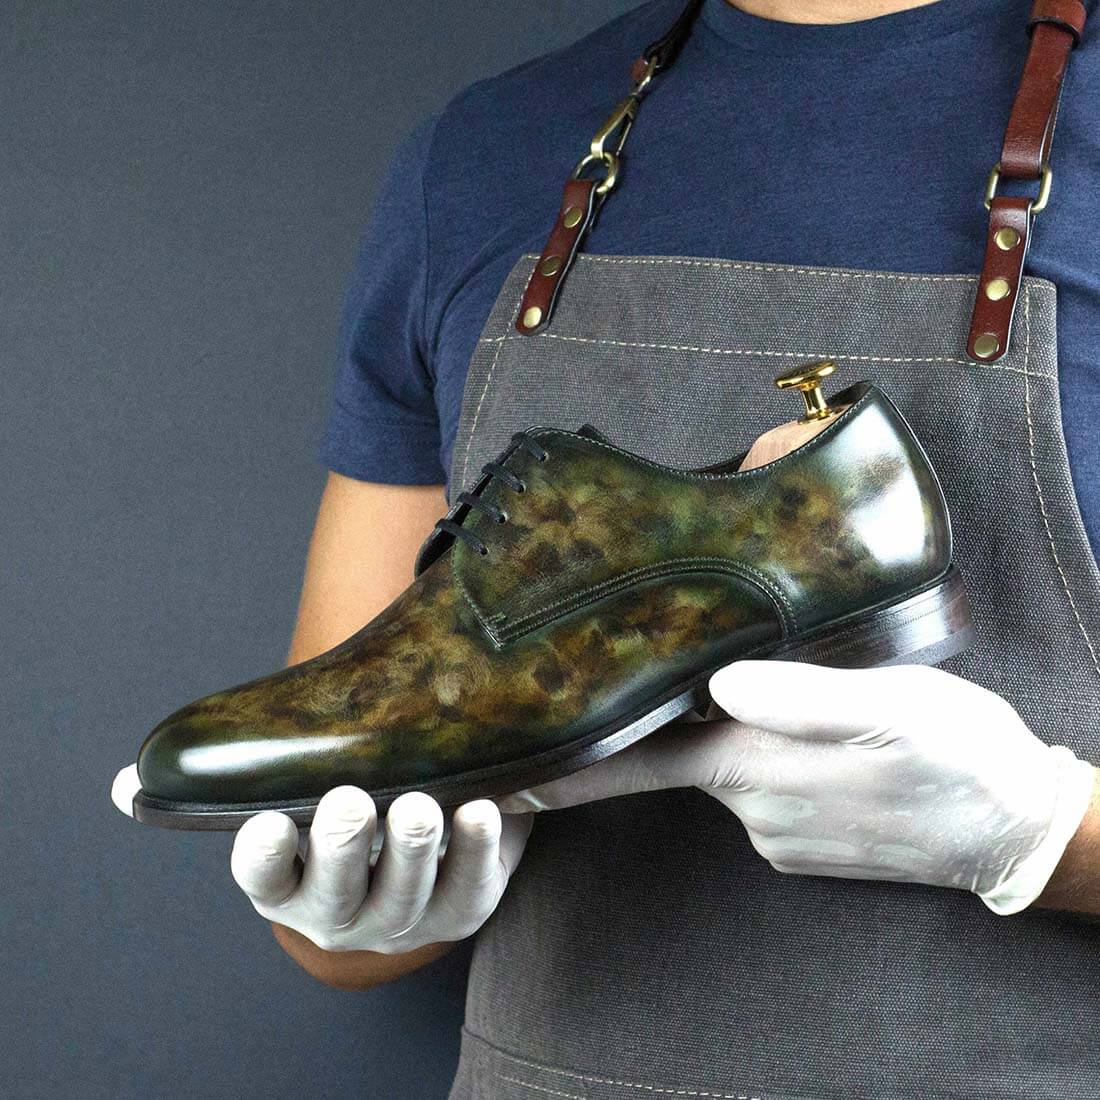 A craftsman in a denim apron, holding a luxurious hand-finished leather Luxury shoe with a unique marbled pattern, wearing white gloves to emphasize the meticulous care and quality associated with high-end shoe craftsmanship.